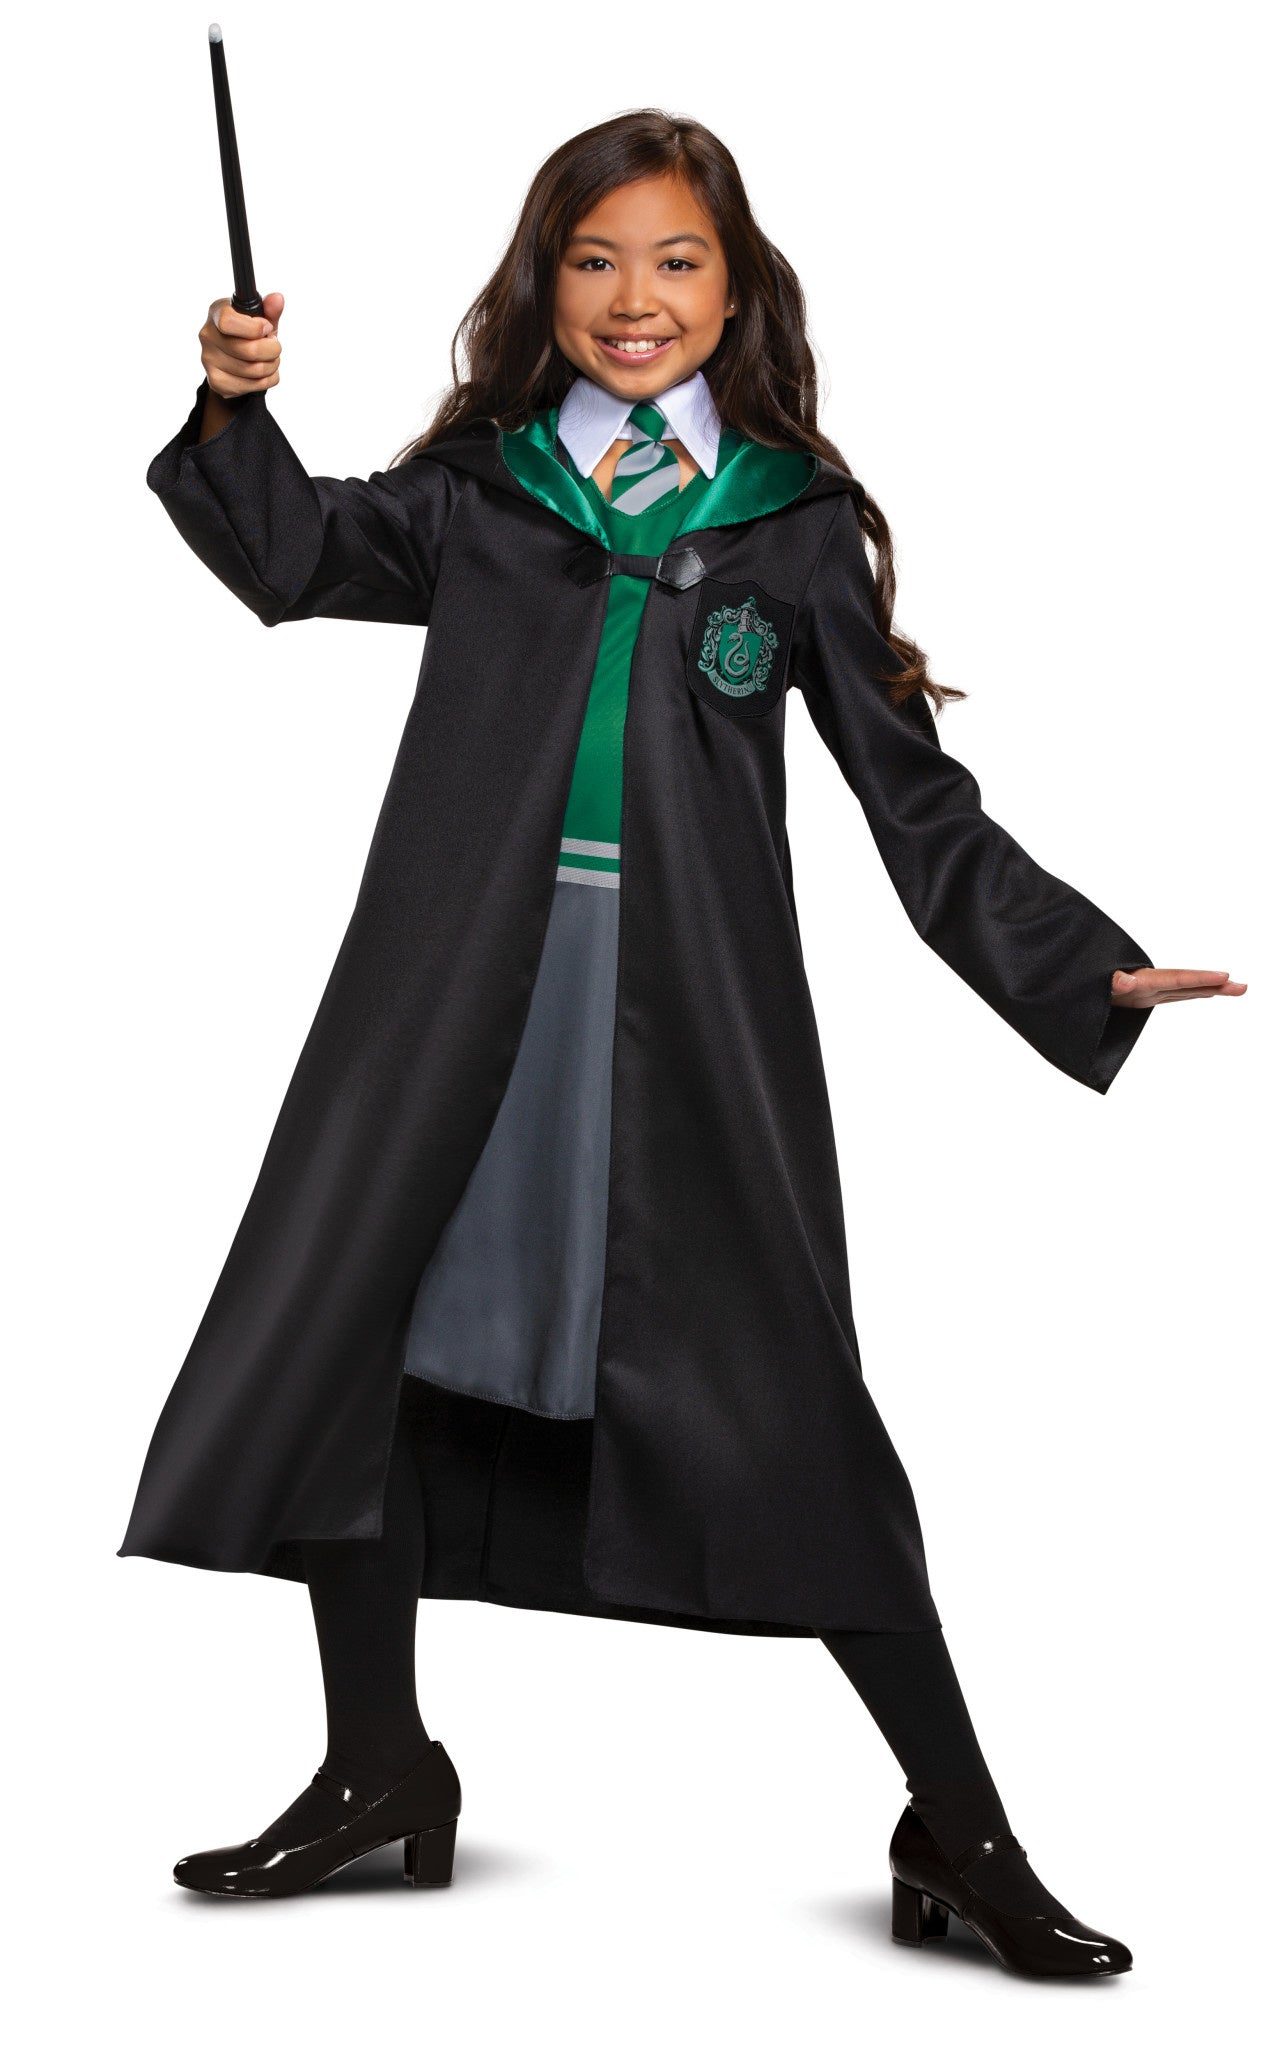 Harry Potter Slytherin Halloween Costume and Makeup Look